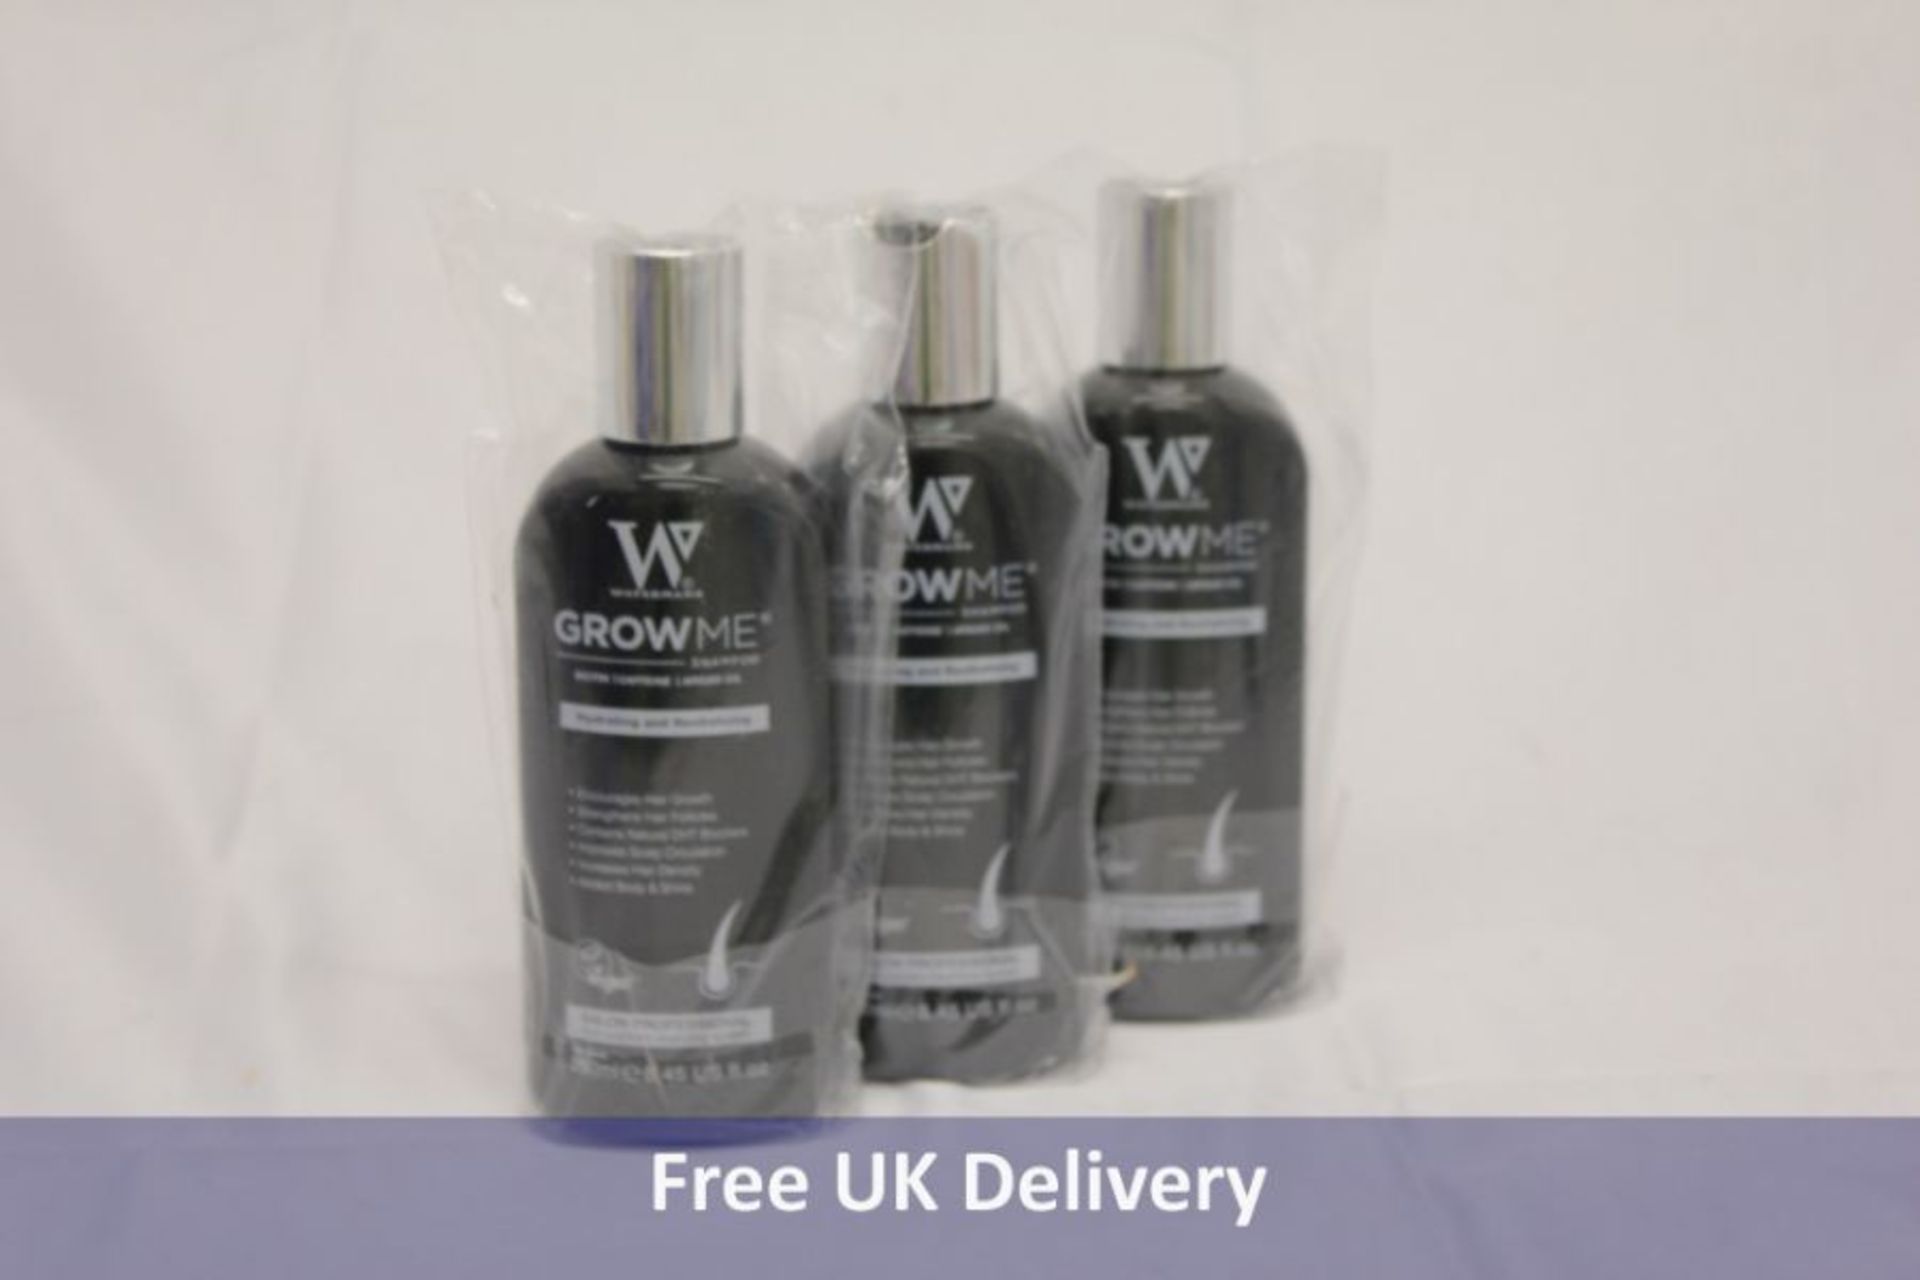 Twenty-five Hair Growth Shampoo and Conditioner by Watermans UK Male and Female Hair Loss Products,